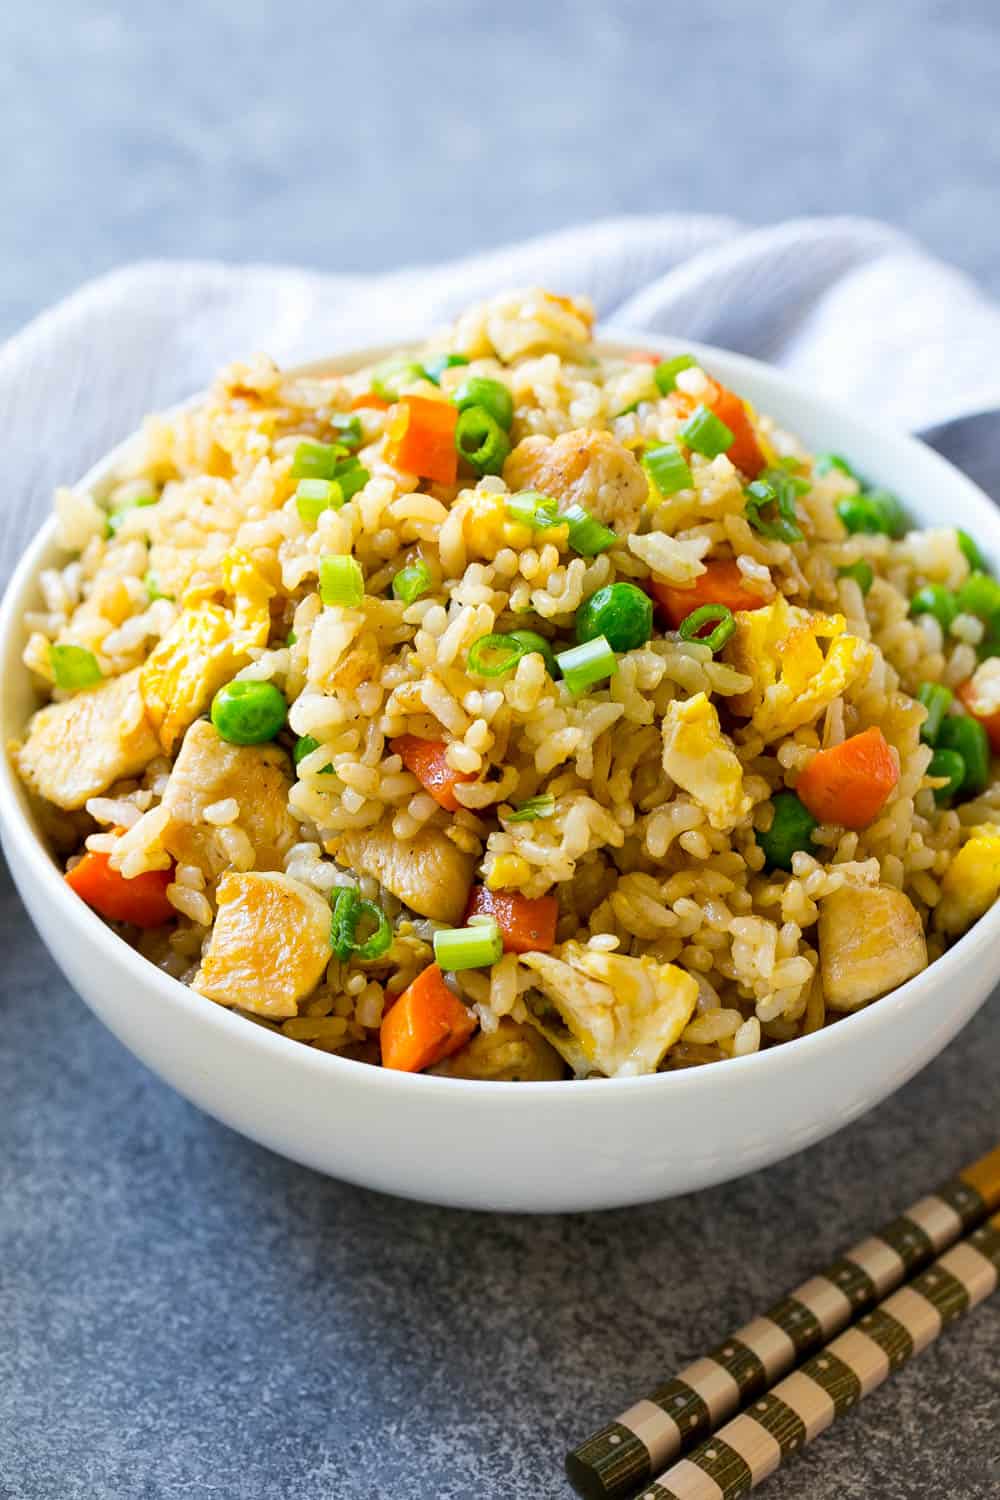 Chicken Fried Rice Takeout classic friedd rice made